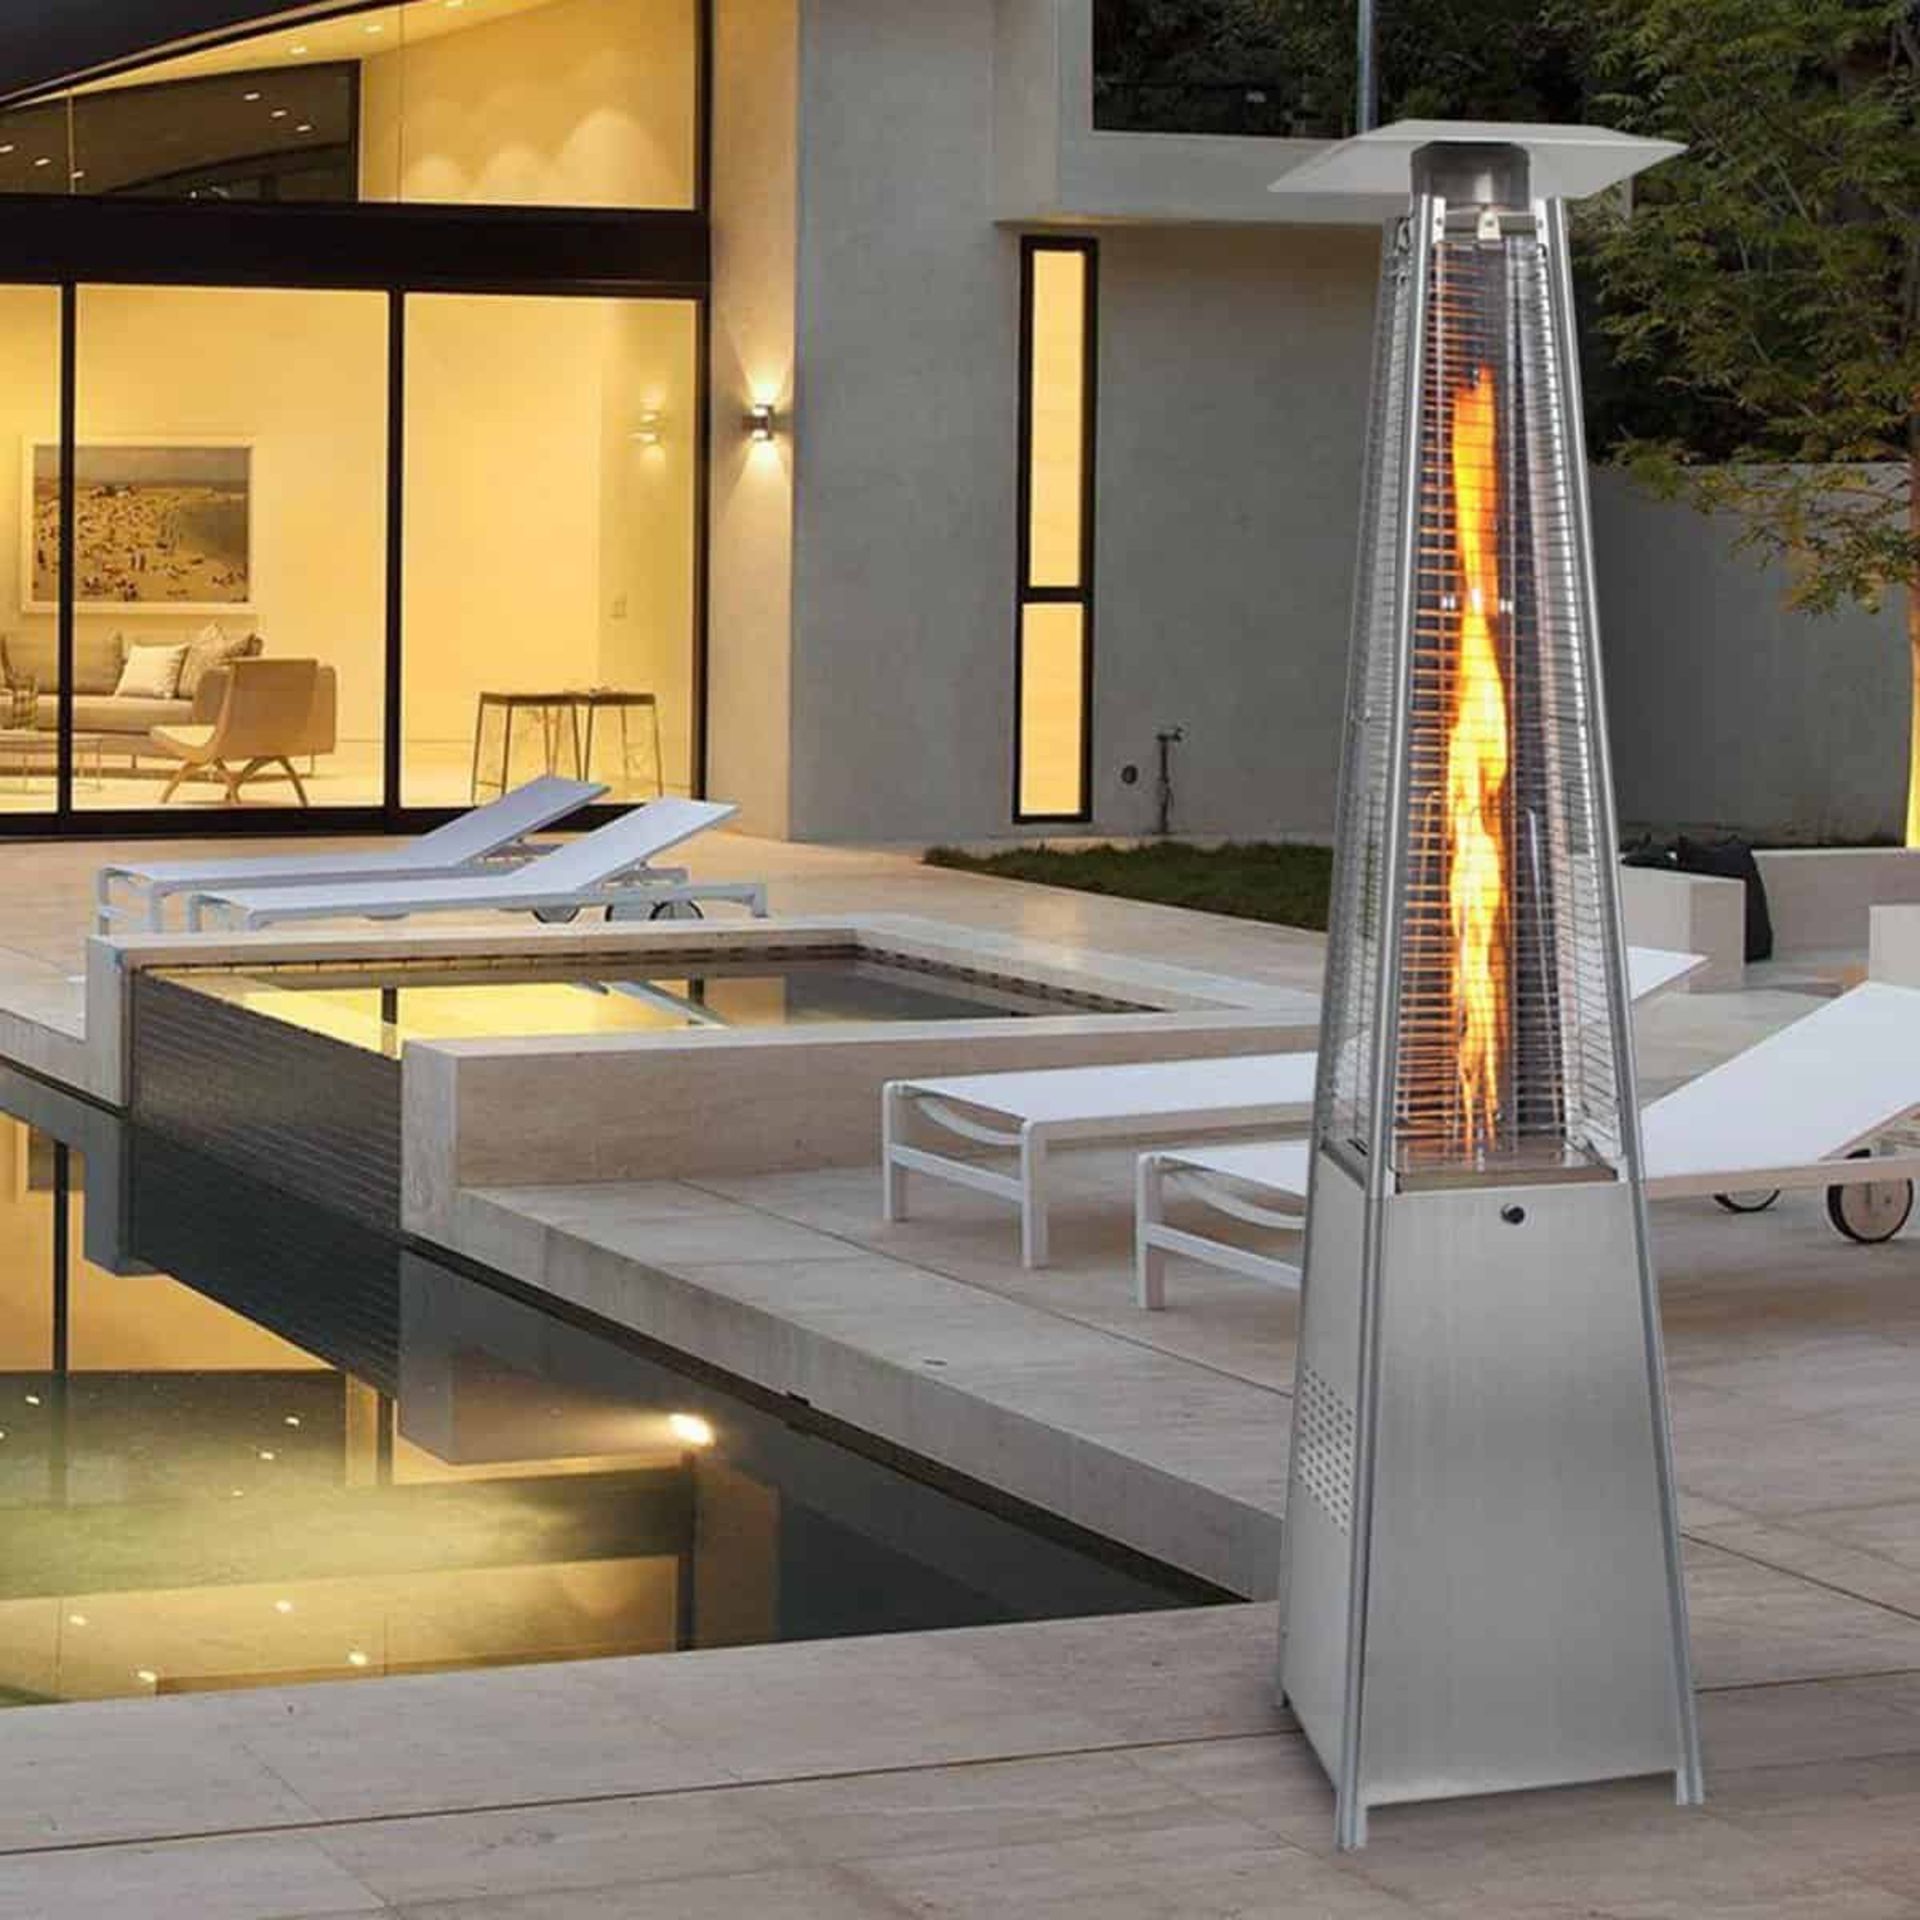 RRP £399 - New Chelsea Garden Company 2.2m Stainless Steel Pyramid Heater